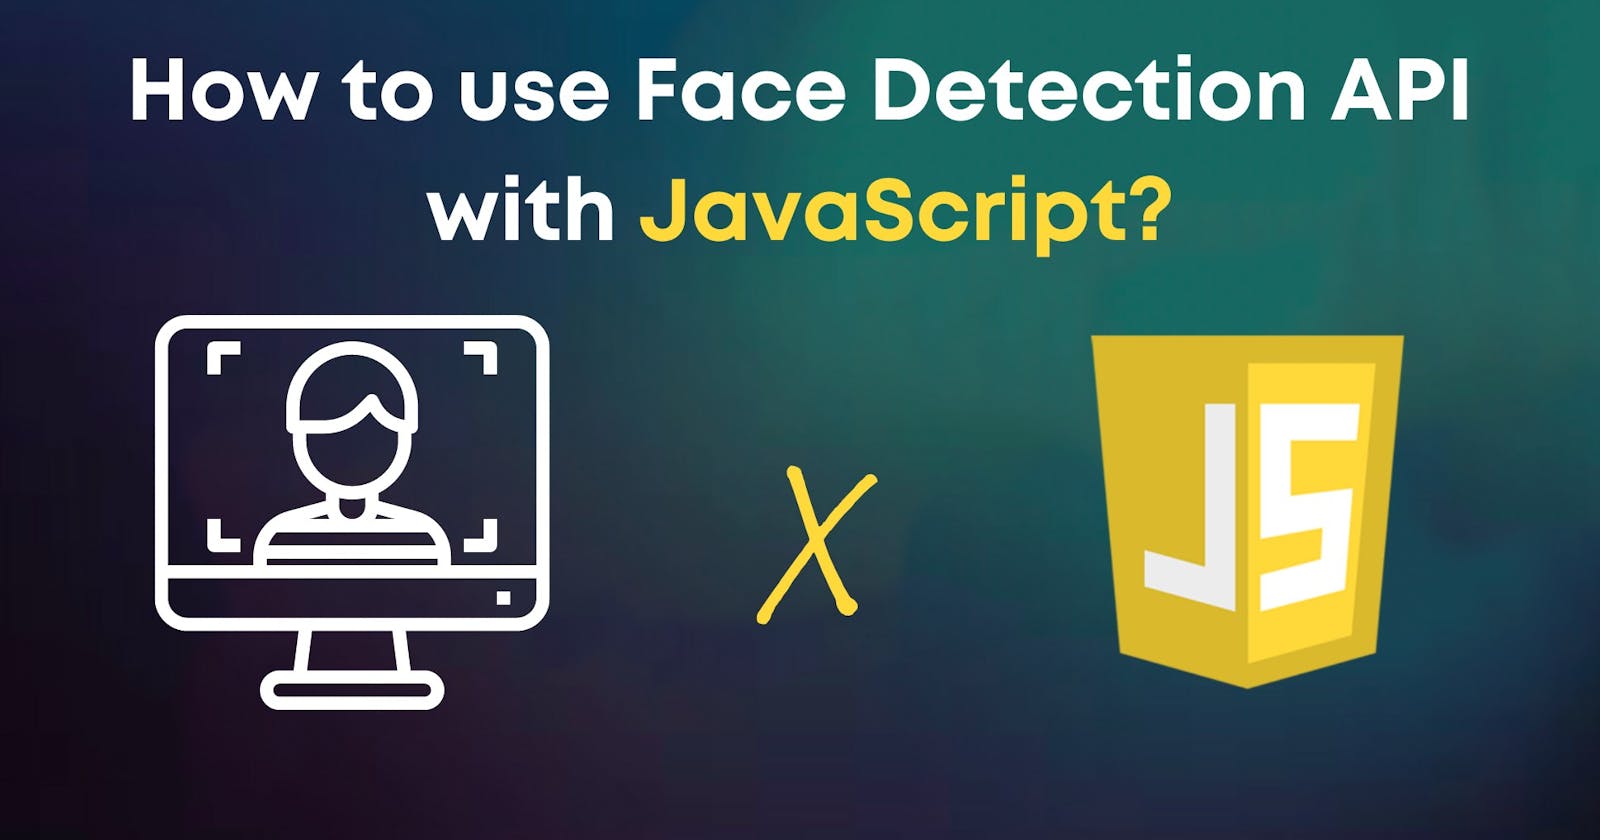 How to use Face Detection API with JavaScript in 5 minutes?